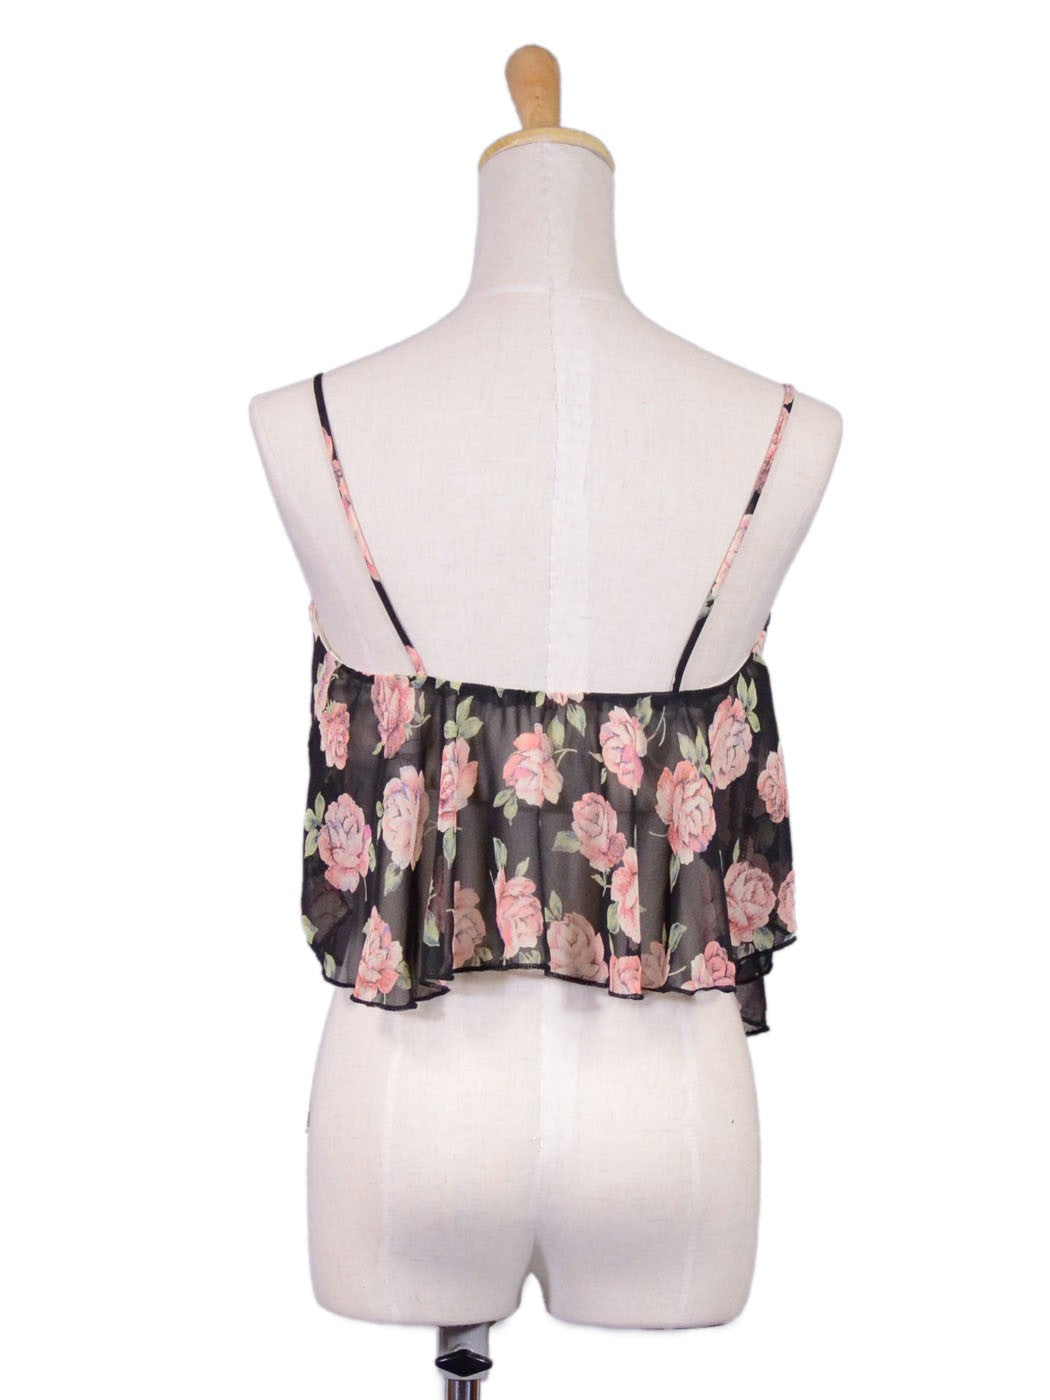 Audrey 3+1 Sweet Vintage Inspired Spring Floral Chiffon Ruffle Tank Top